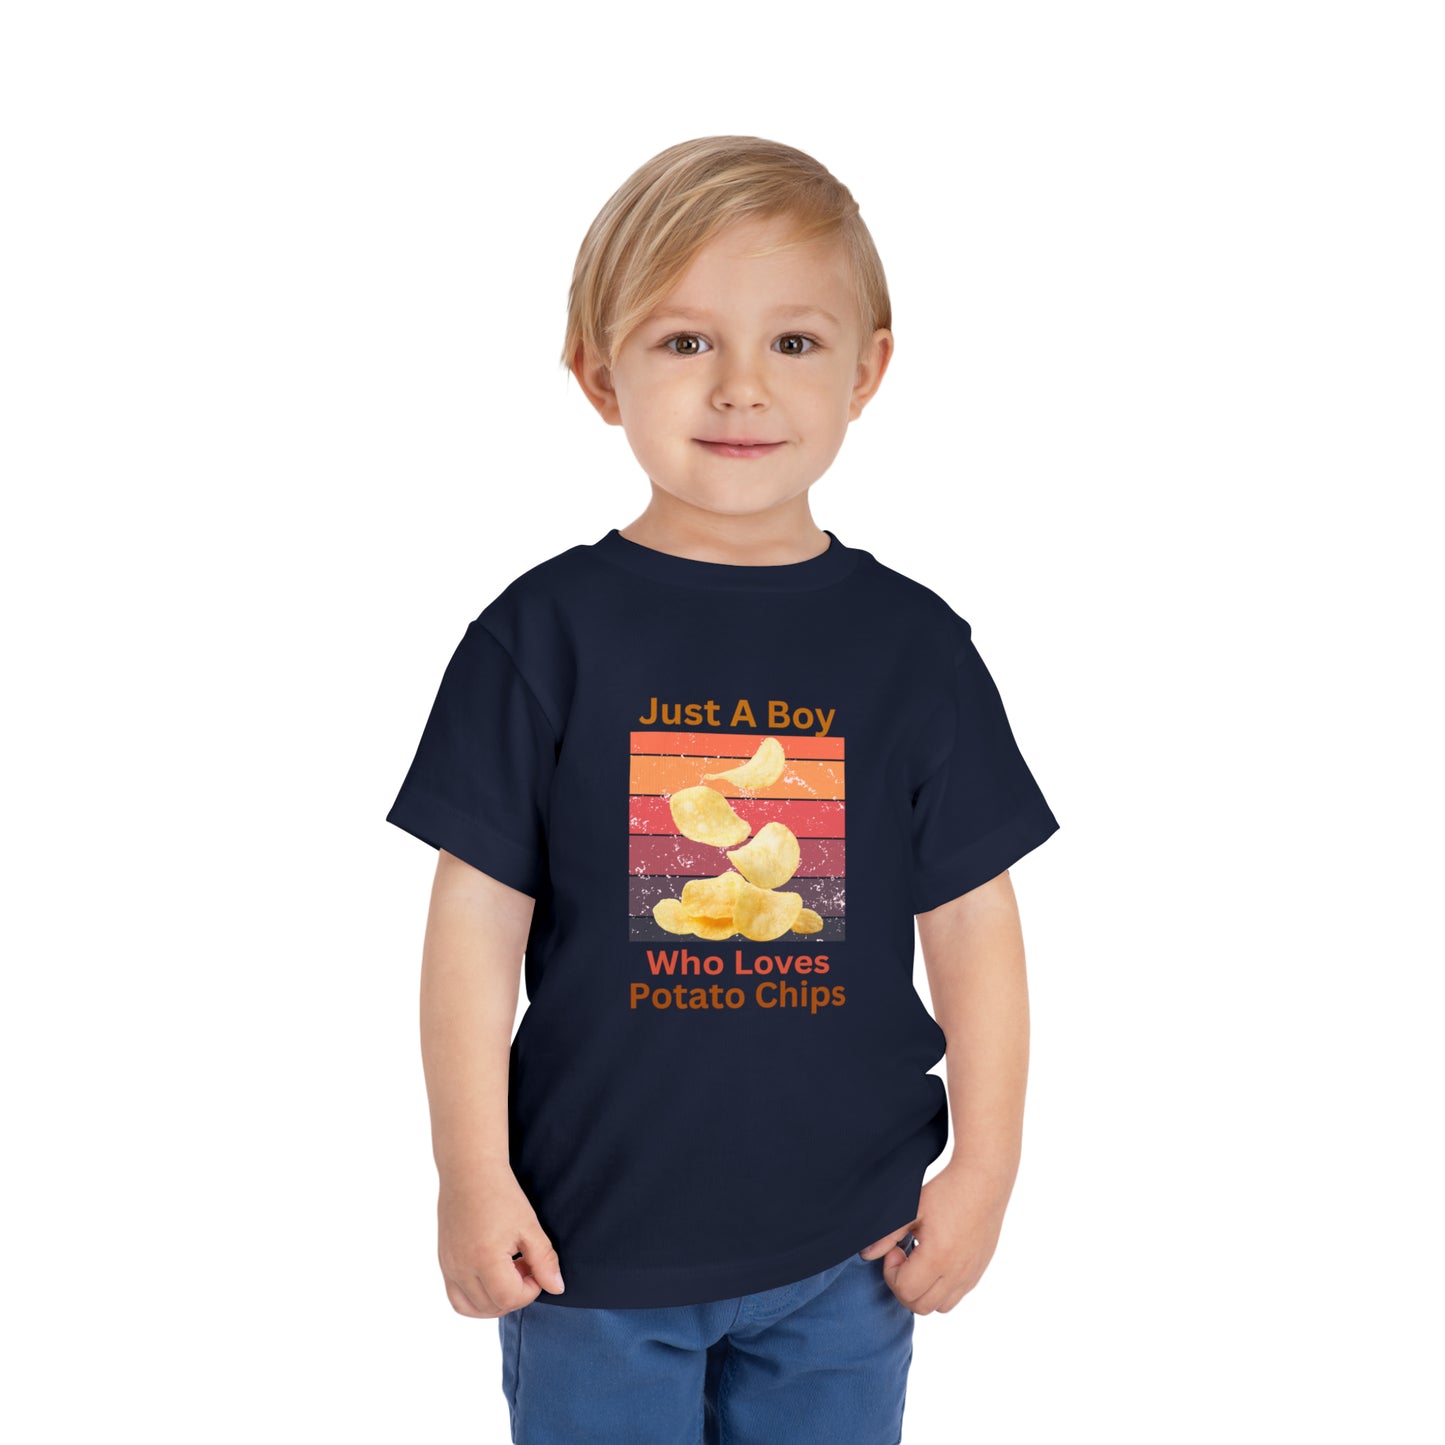 Just a Boy Who Loves Potato Chips - Toddler Short Sleeve Tee